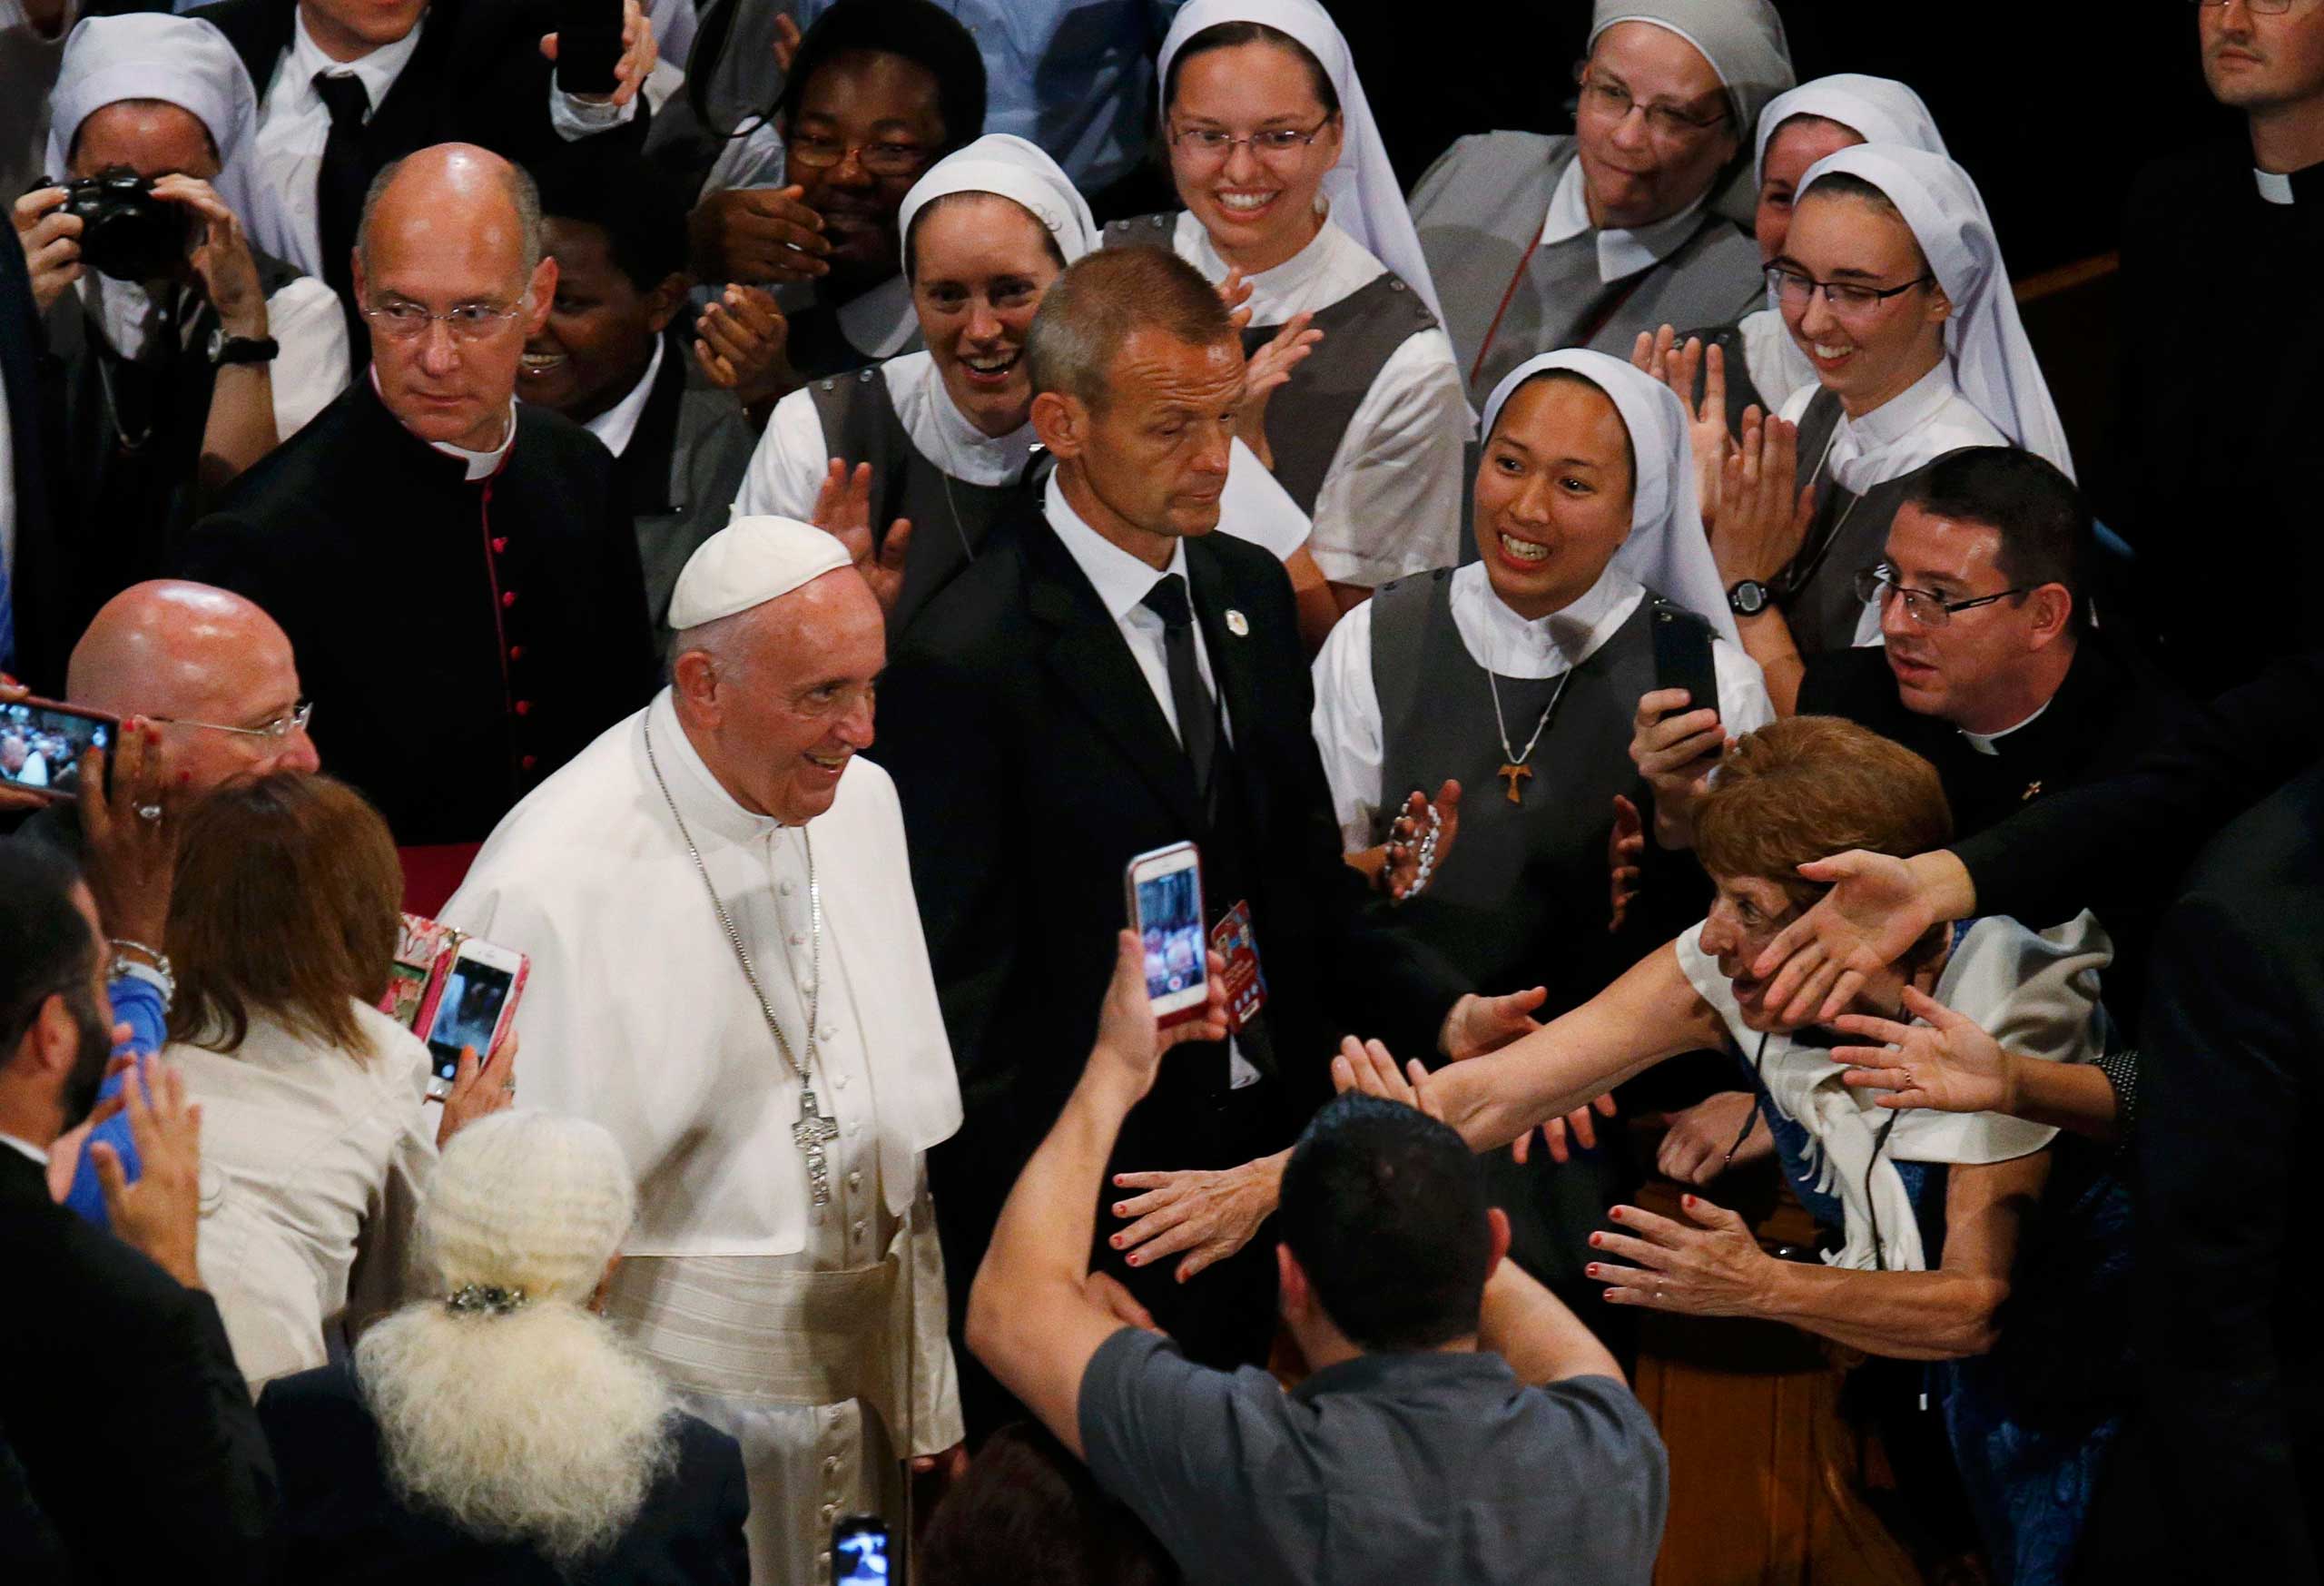 Pope Francis  greets and blesses seminarians, novices, religious guests inside the Basilica of the National Shrine of the Immaculate Conception in Washington, on Sept. 23, 2015.